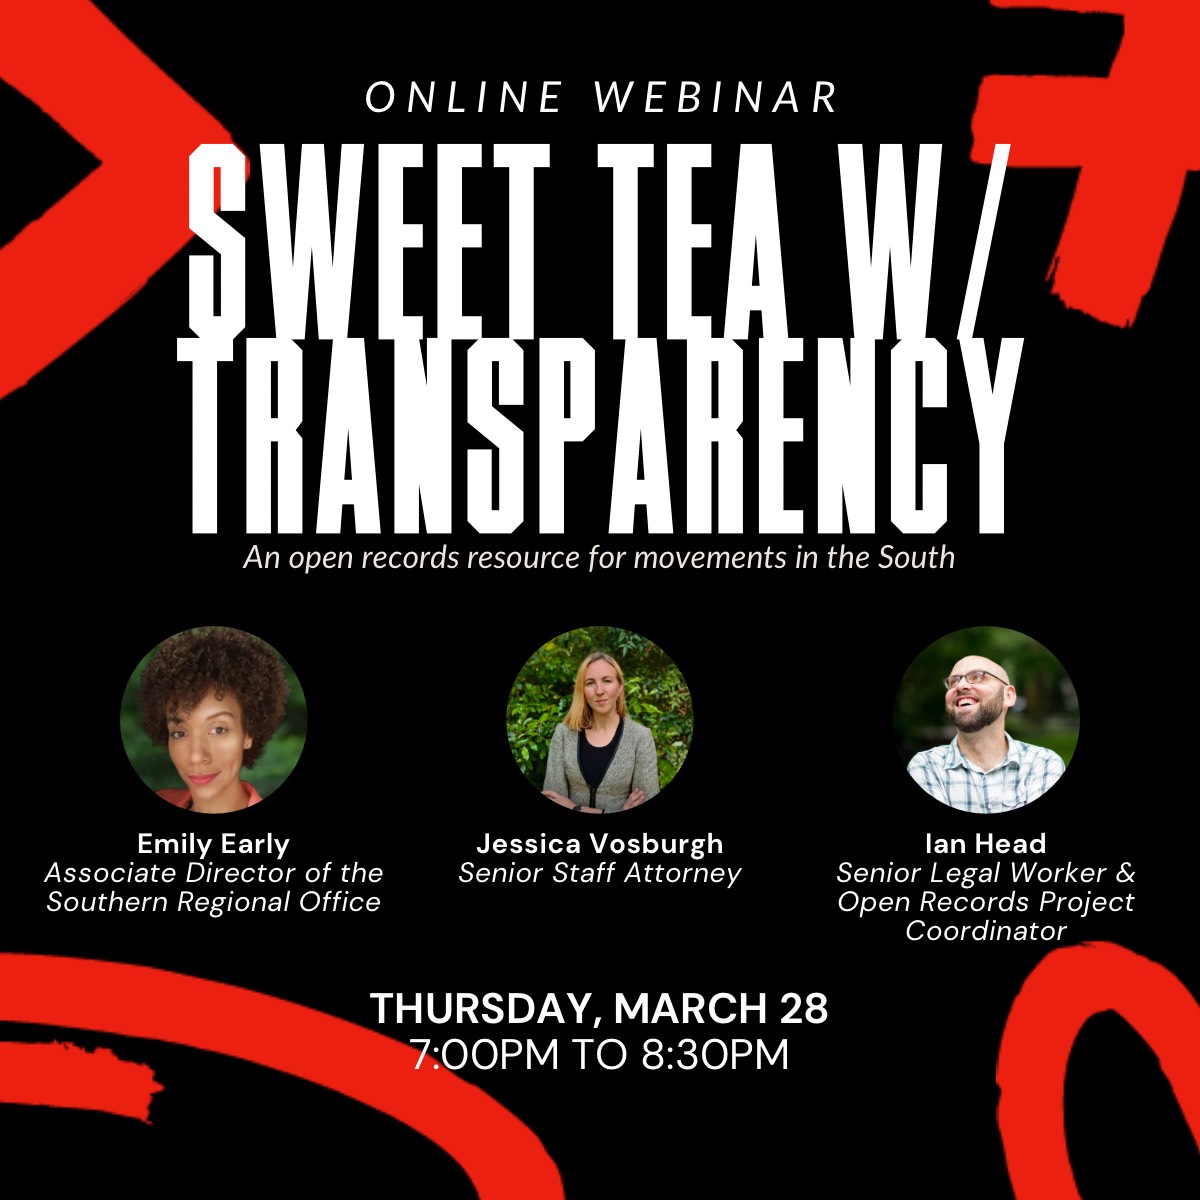 White text on a black background: Online webinar Sweet Tea with Transparency, an open records resource for movements in the South. Headshots of Emily Early, Associate Director of Southern Regional Office, Jessica Vosburgh, Senior Staff Attorney, Ian Head, Senior Legal Worker and Open Records Project Coordinator. Thursday, March 28 7:00PM to 8:30PM